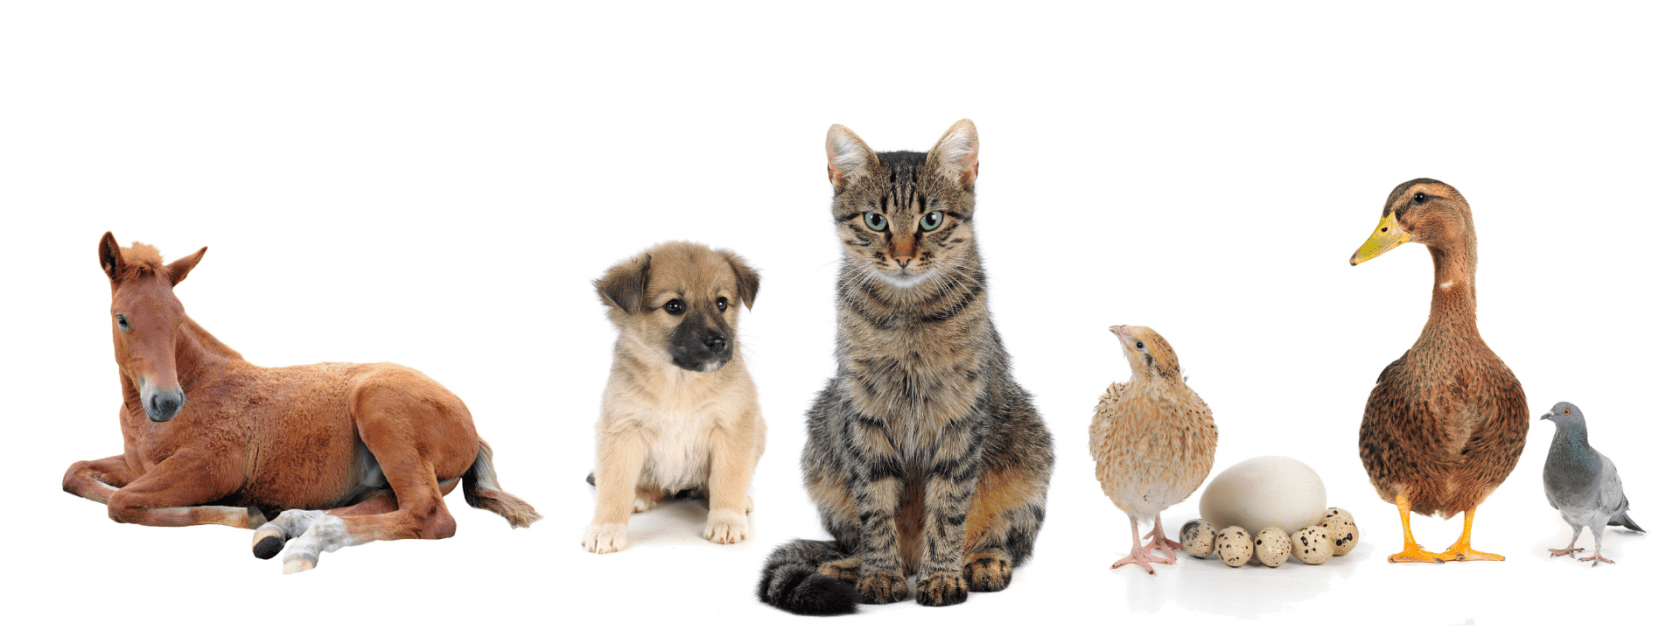 An image of animals, with a brown horse on the left most side followed by a pug then a cat then a chick a duck and finally a bird